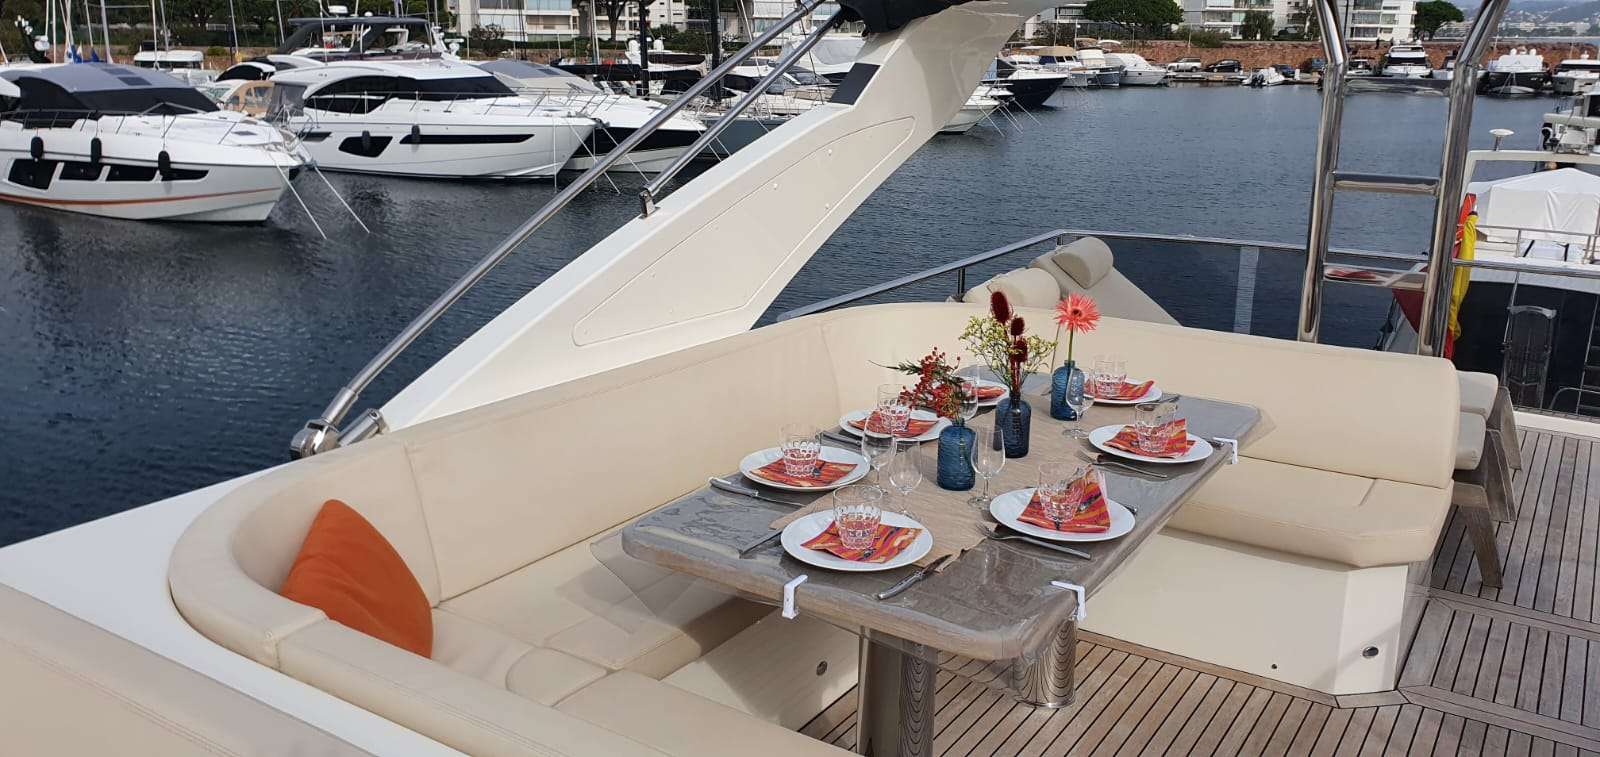 ABSOLUTE - Yacht Charter Toulon & Boat hire in Fr. Riviera, Corsica & Sardinia 3